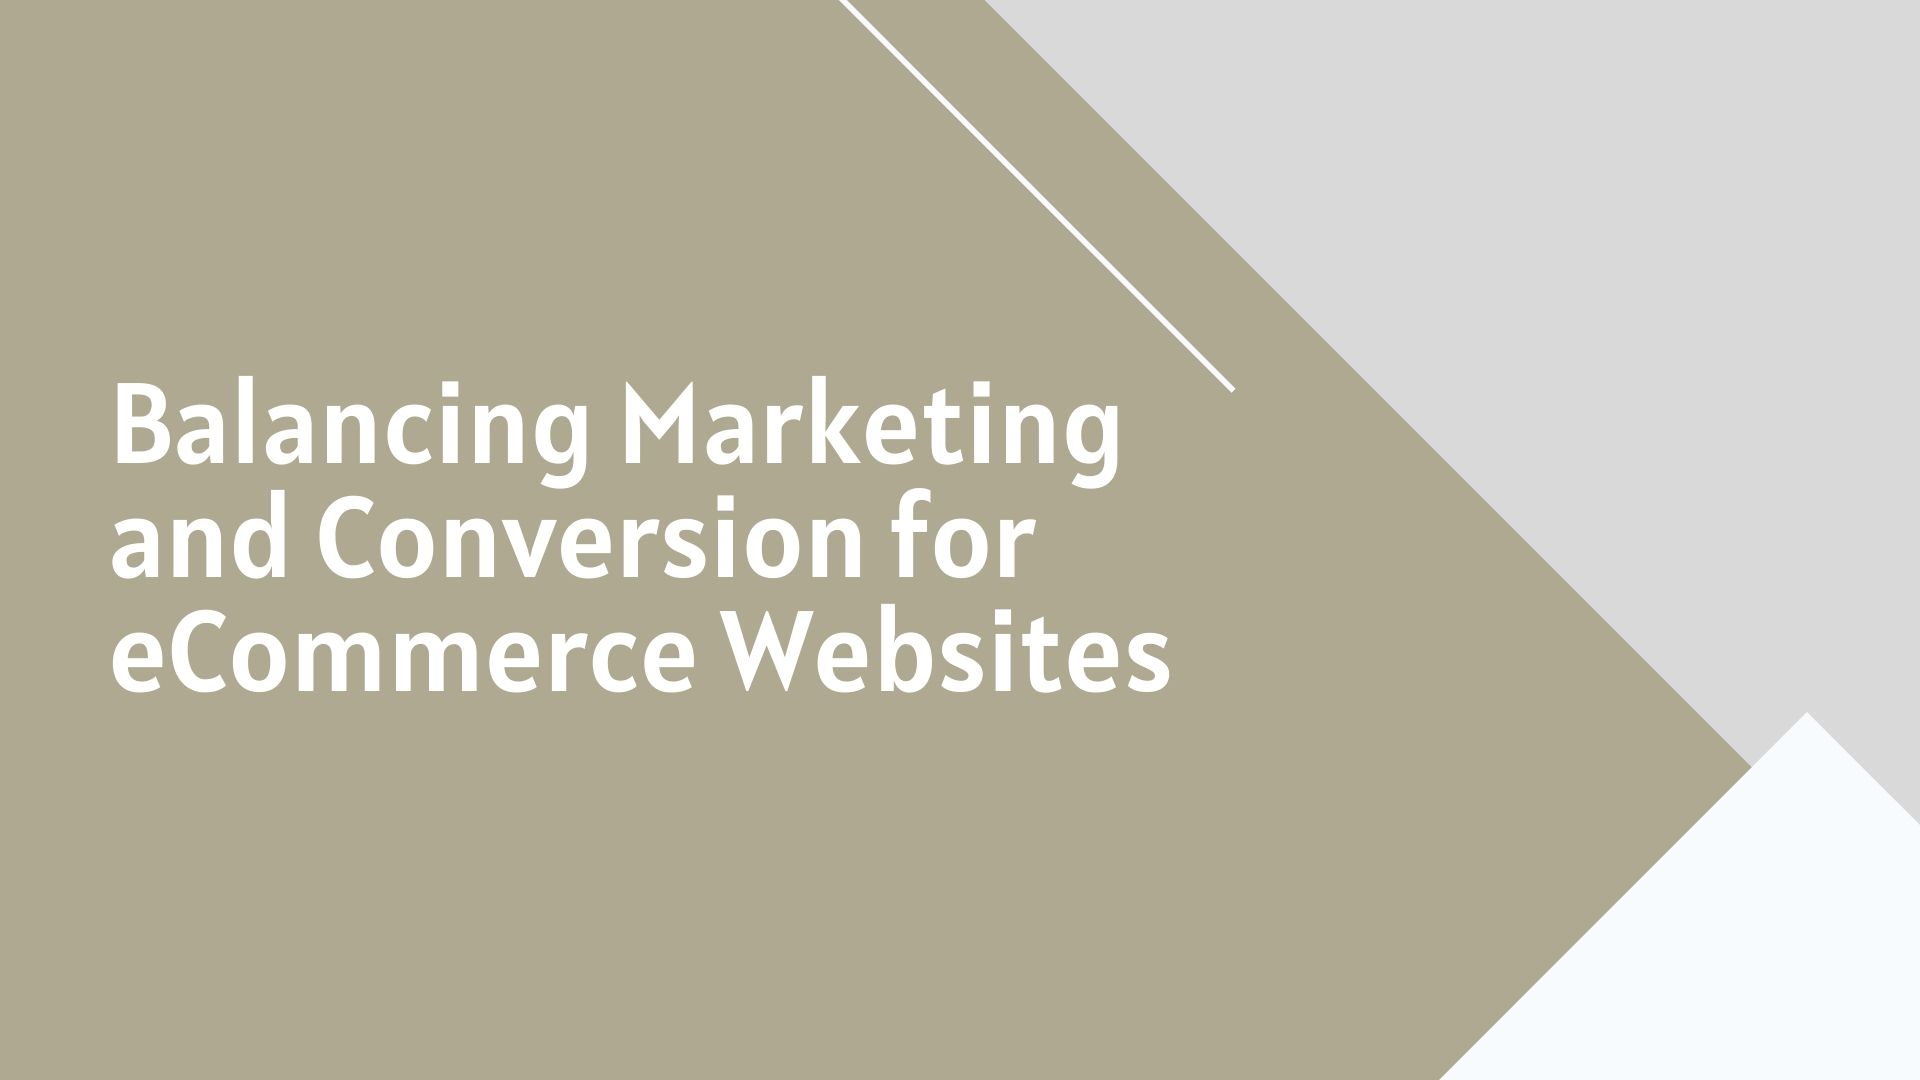 Balancing Marketing and Conversion for eCommerce Websites